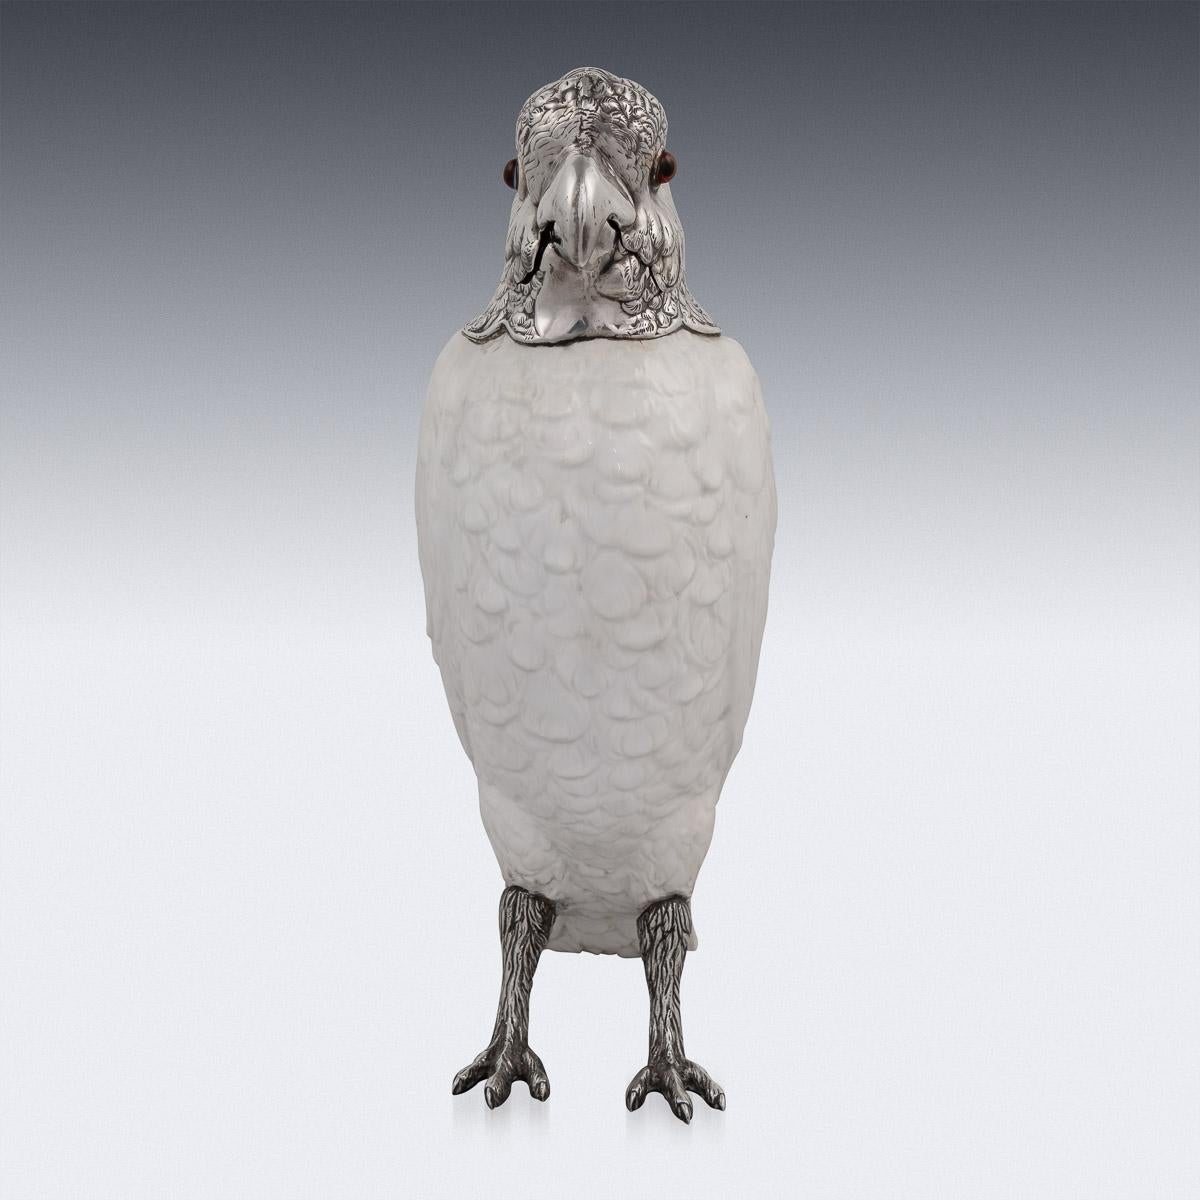 Antique early-20th century English solid silver and mounted on Spode Copeland's China novelty wine jug, in the form of a standing cockatoo, set with coloured glass eyes and white porcelain body imitating textured plumage, mounted with a